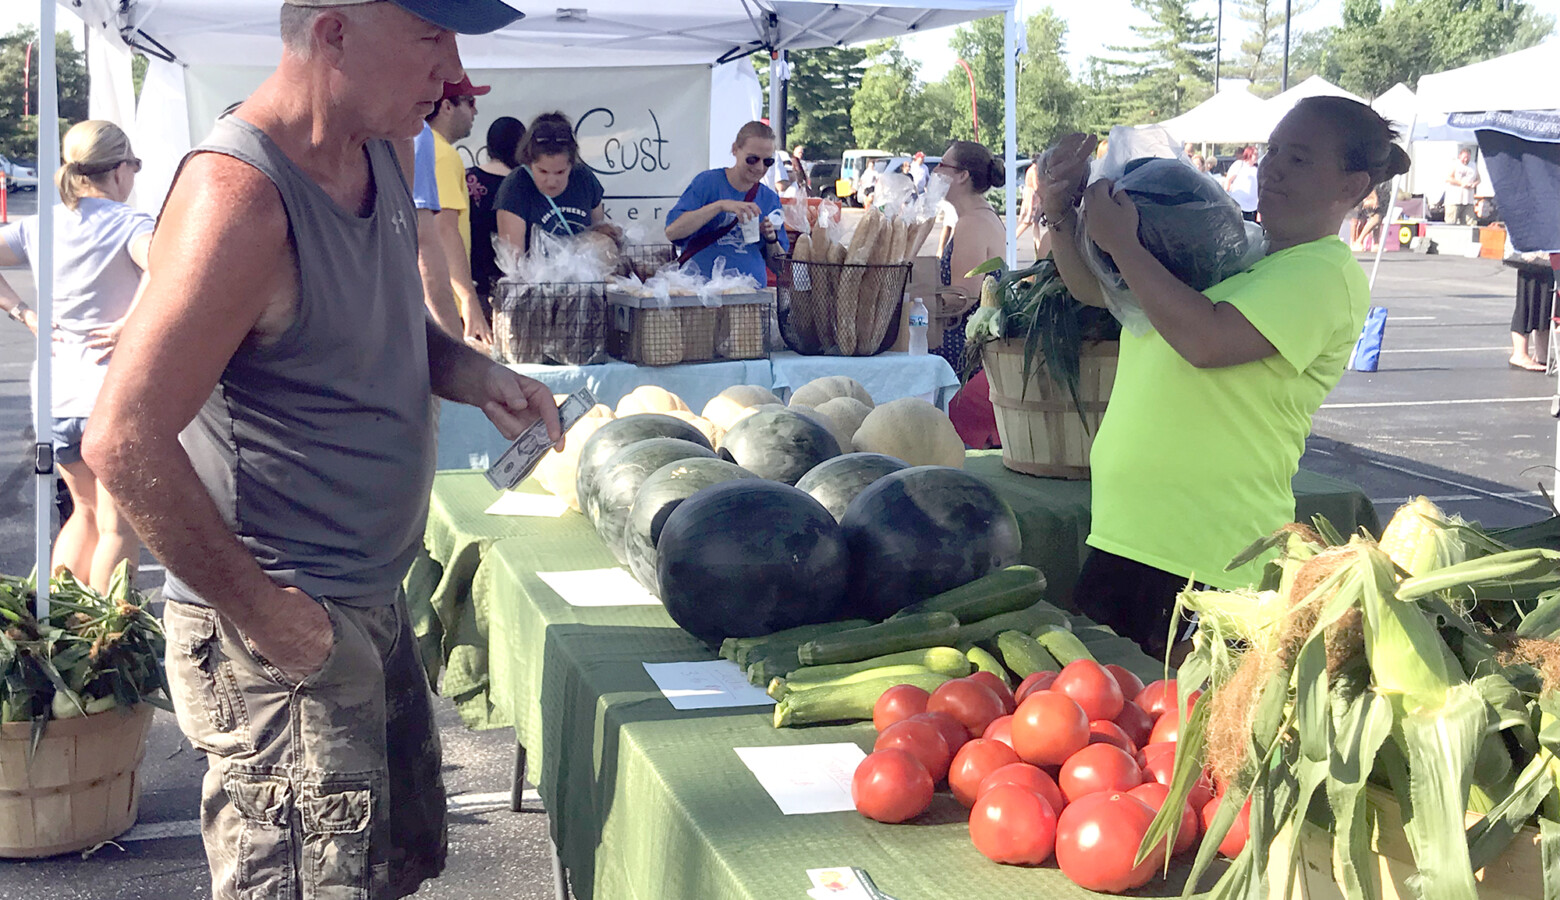 A customer purchases produce at the 2018 Columbus farmers market. (Lauren Bavis/Side Effects Public Media)